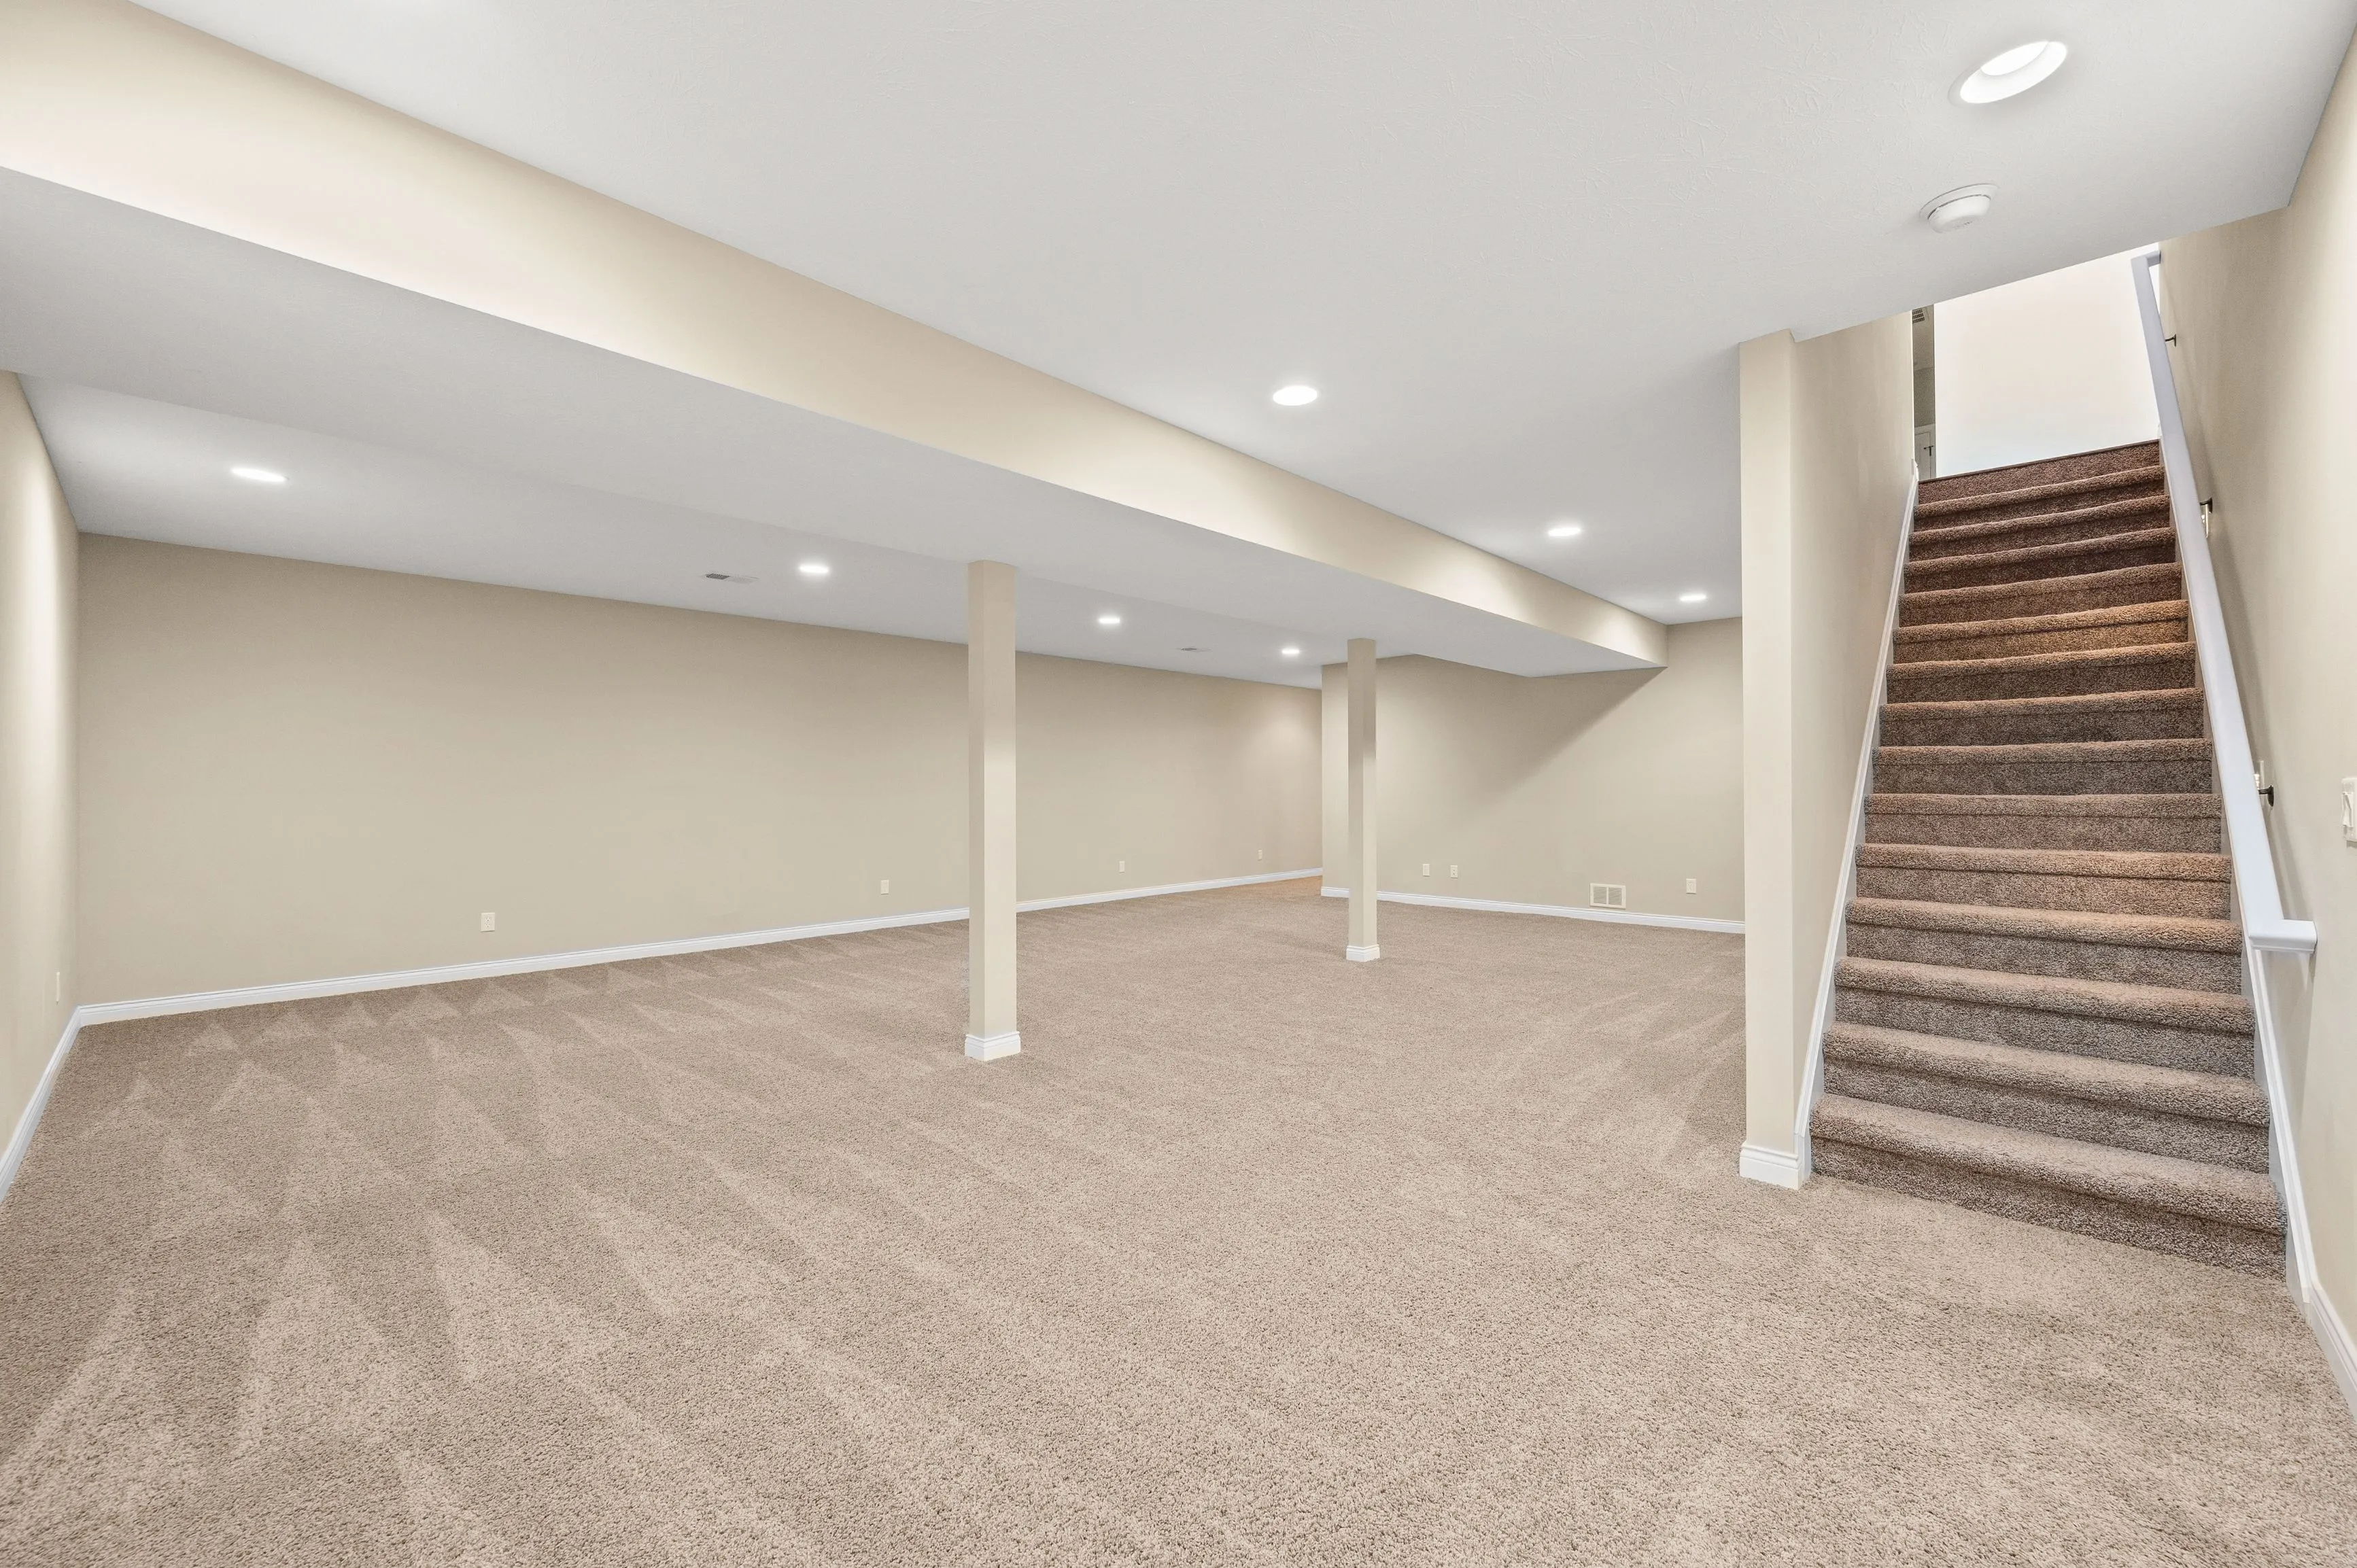 Empty basement interior with beige carpeting, white walls with several support columns, and a staircase to the upper level.